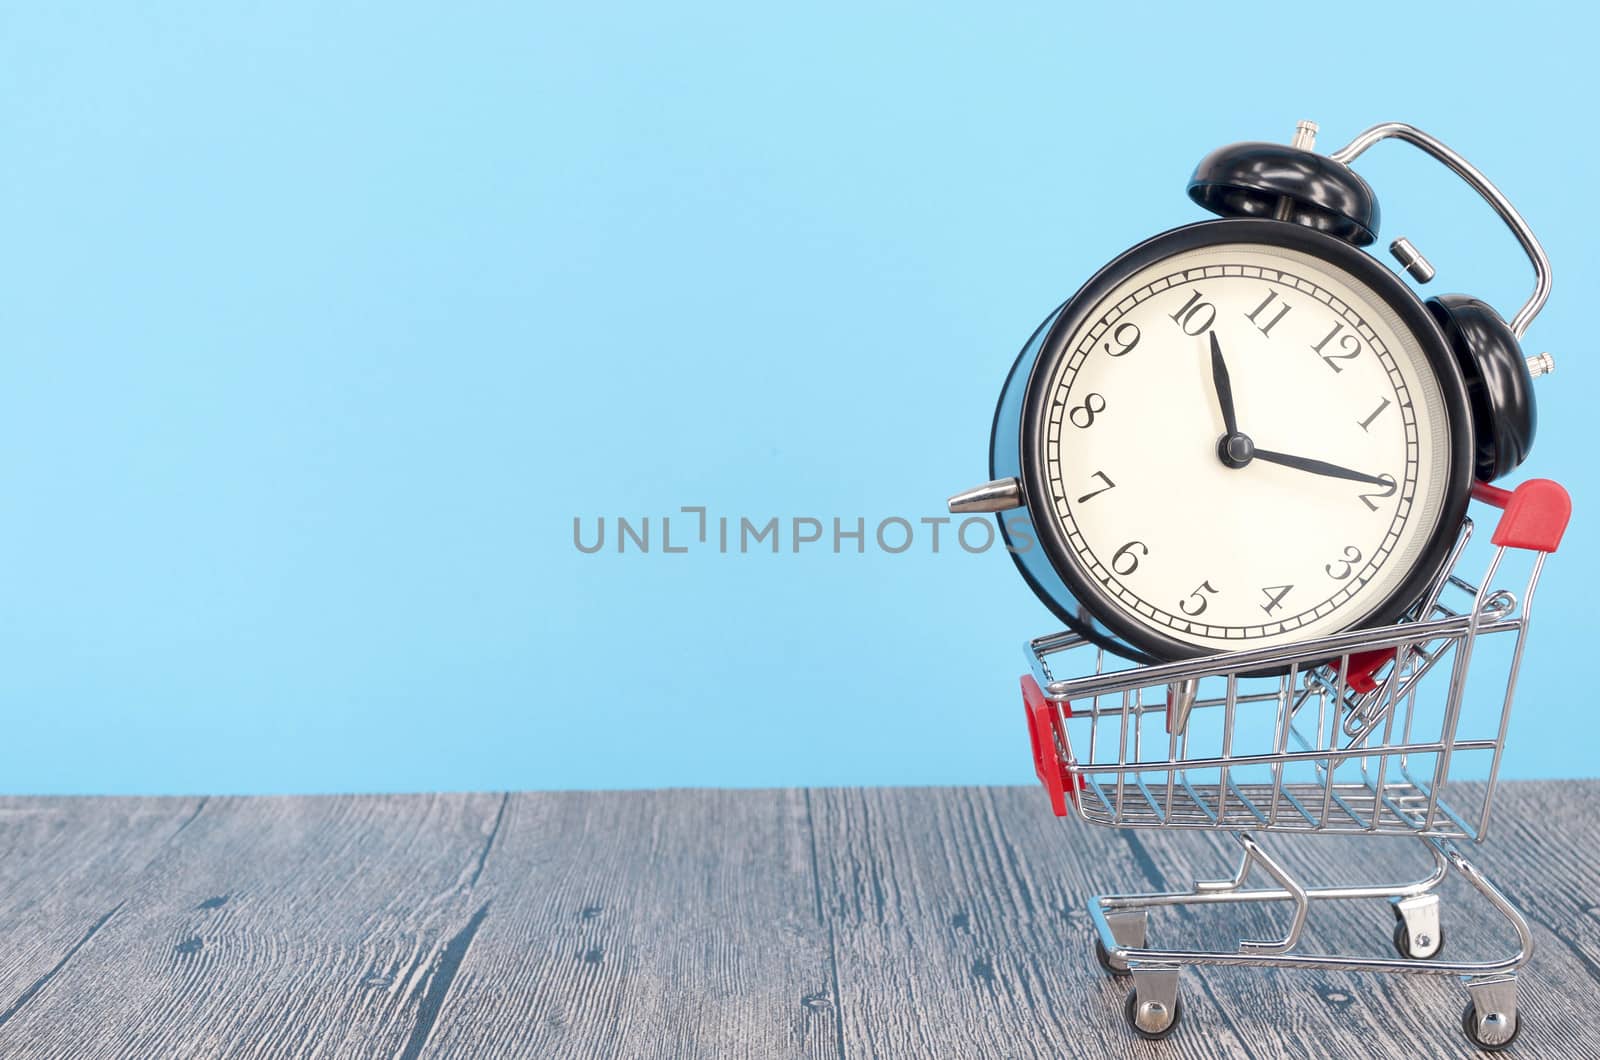 Shopping cart and classic alarm clock on wooden surface. Sale time buy mall market shop consumer concept. Selective focus.